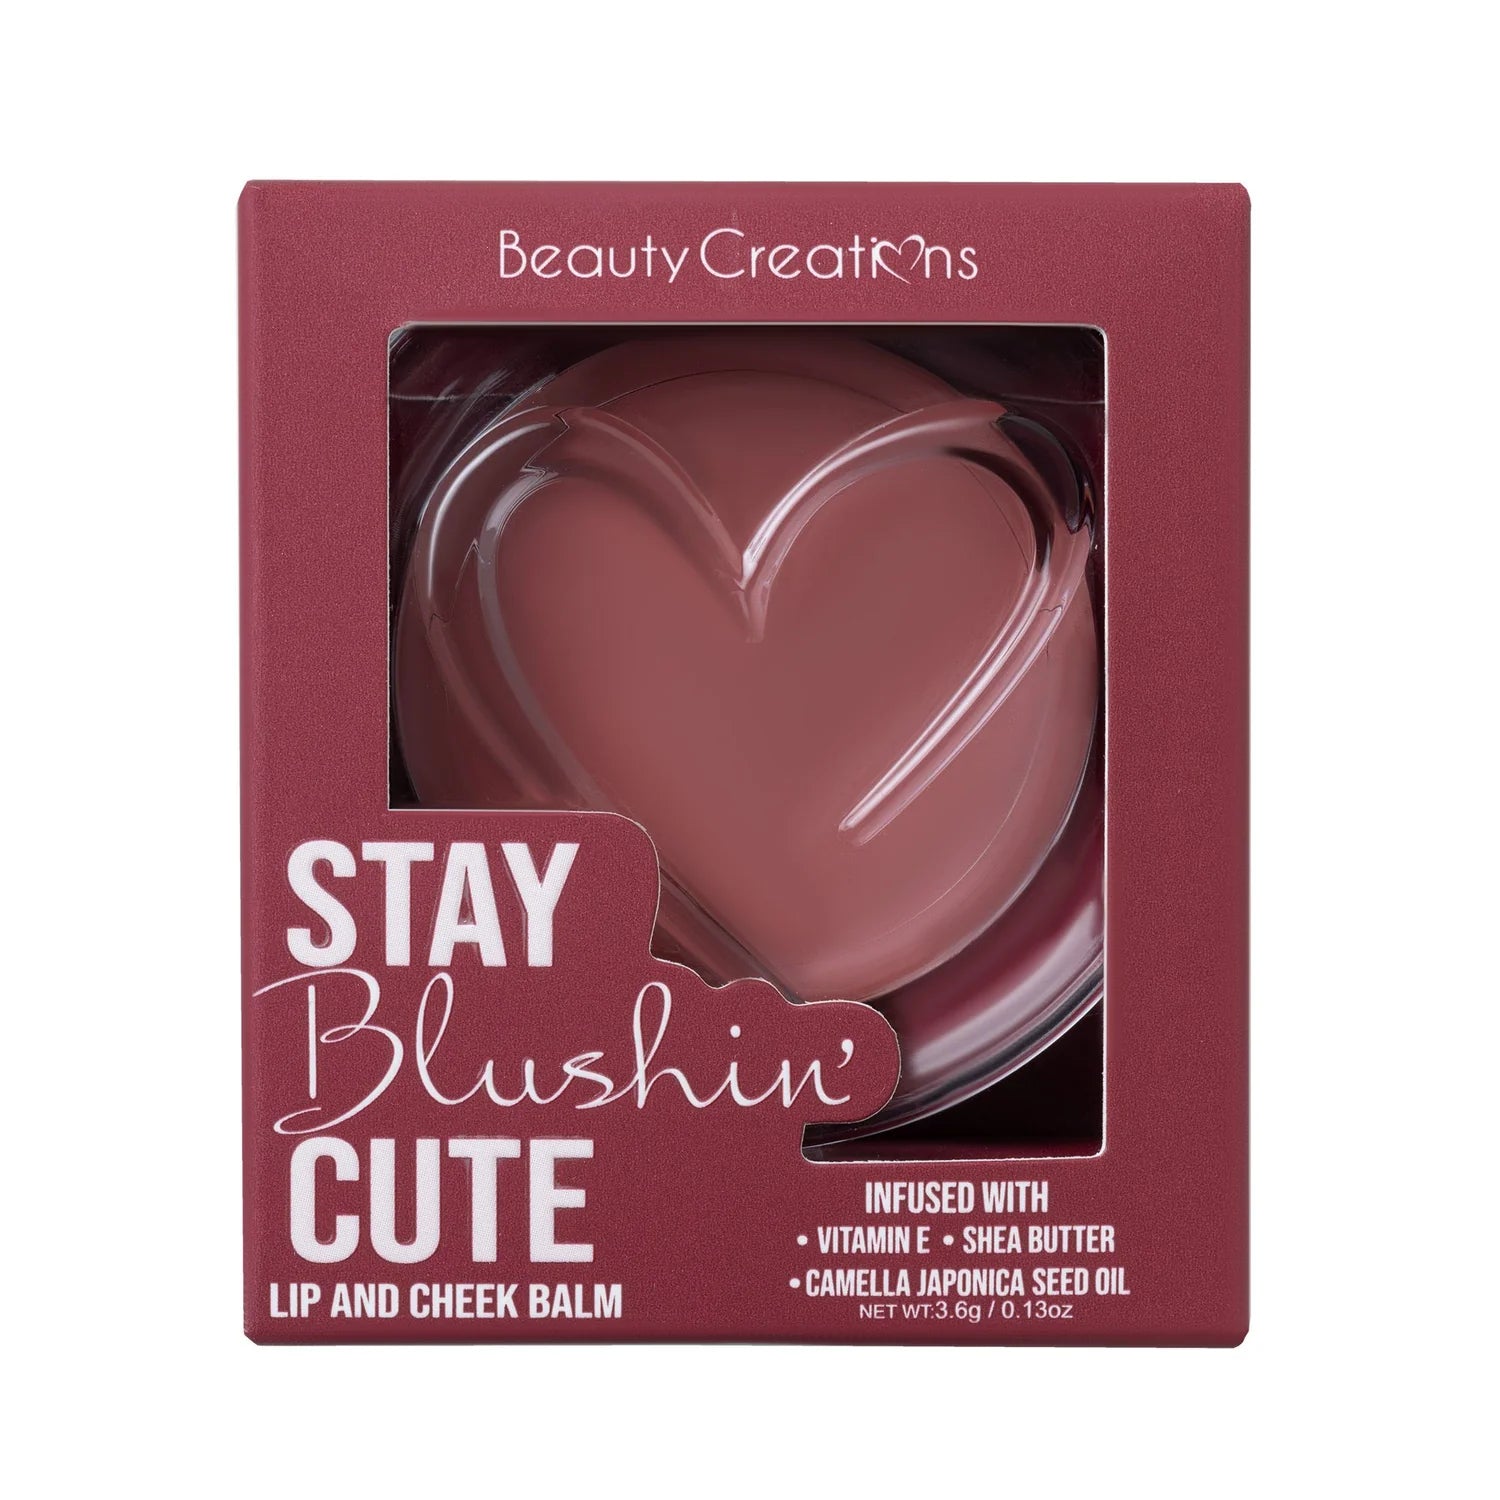 Beauty Creations - Stay Blushing Cute Lip And Cheek Balm - I Can & I Will